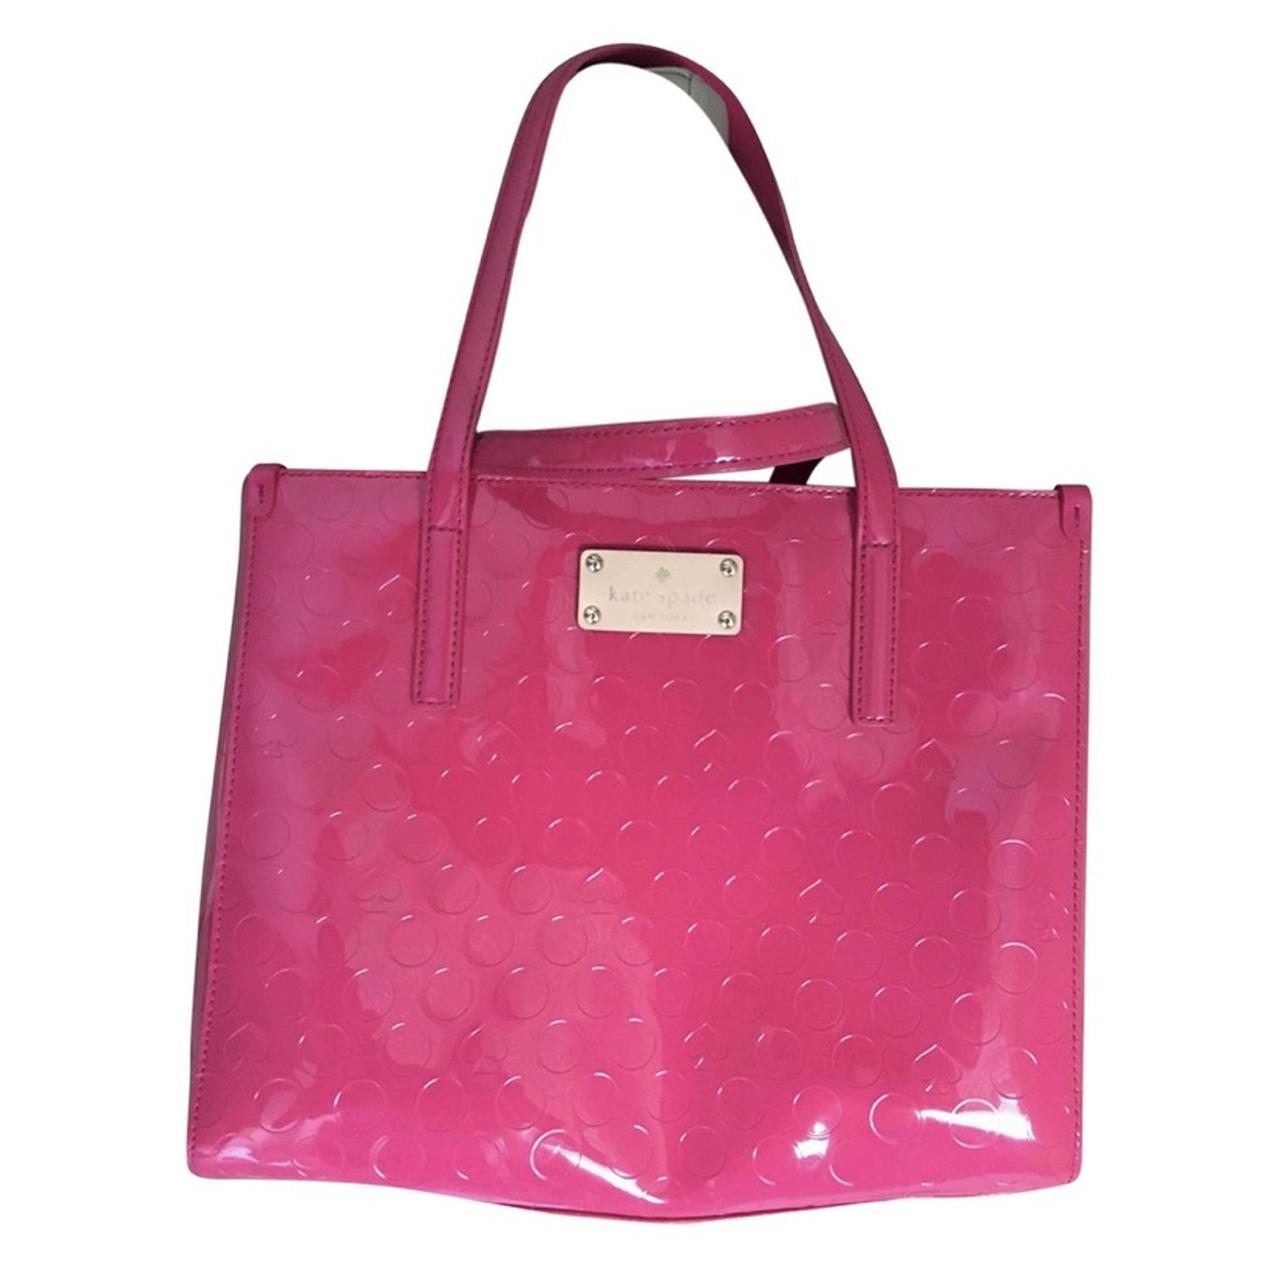 Buy the Kate Spade Hot Pink Leather Purse